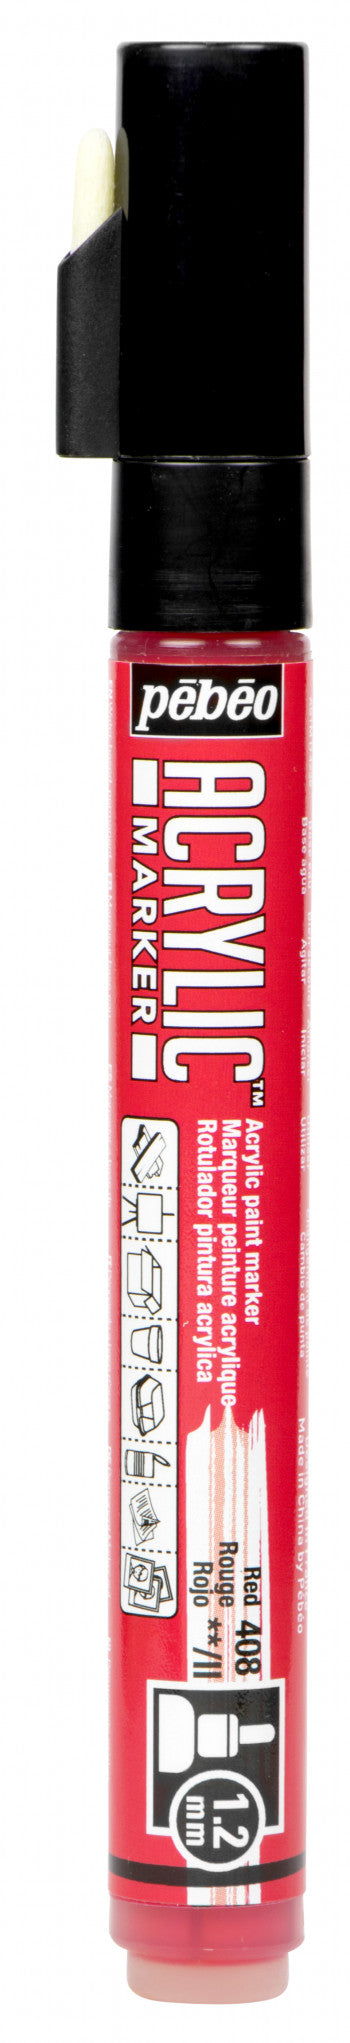 Acrylic Marker 1.2mm Pebeo Red - 408